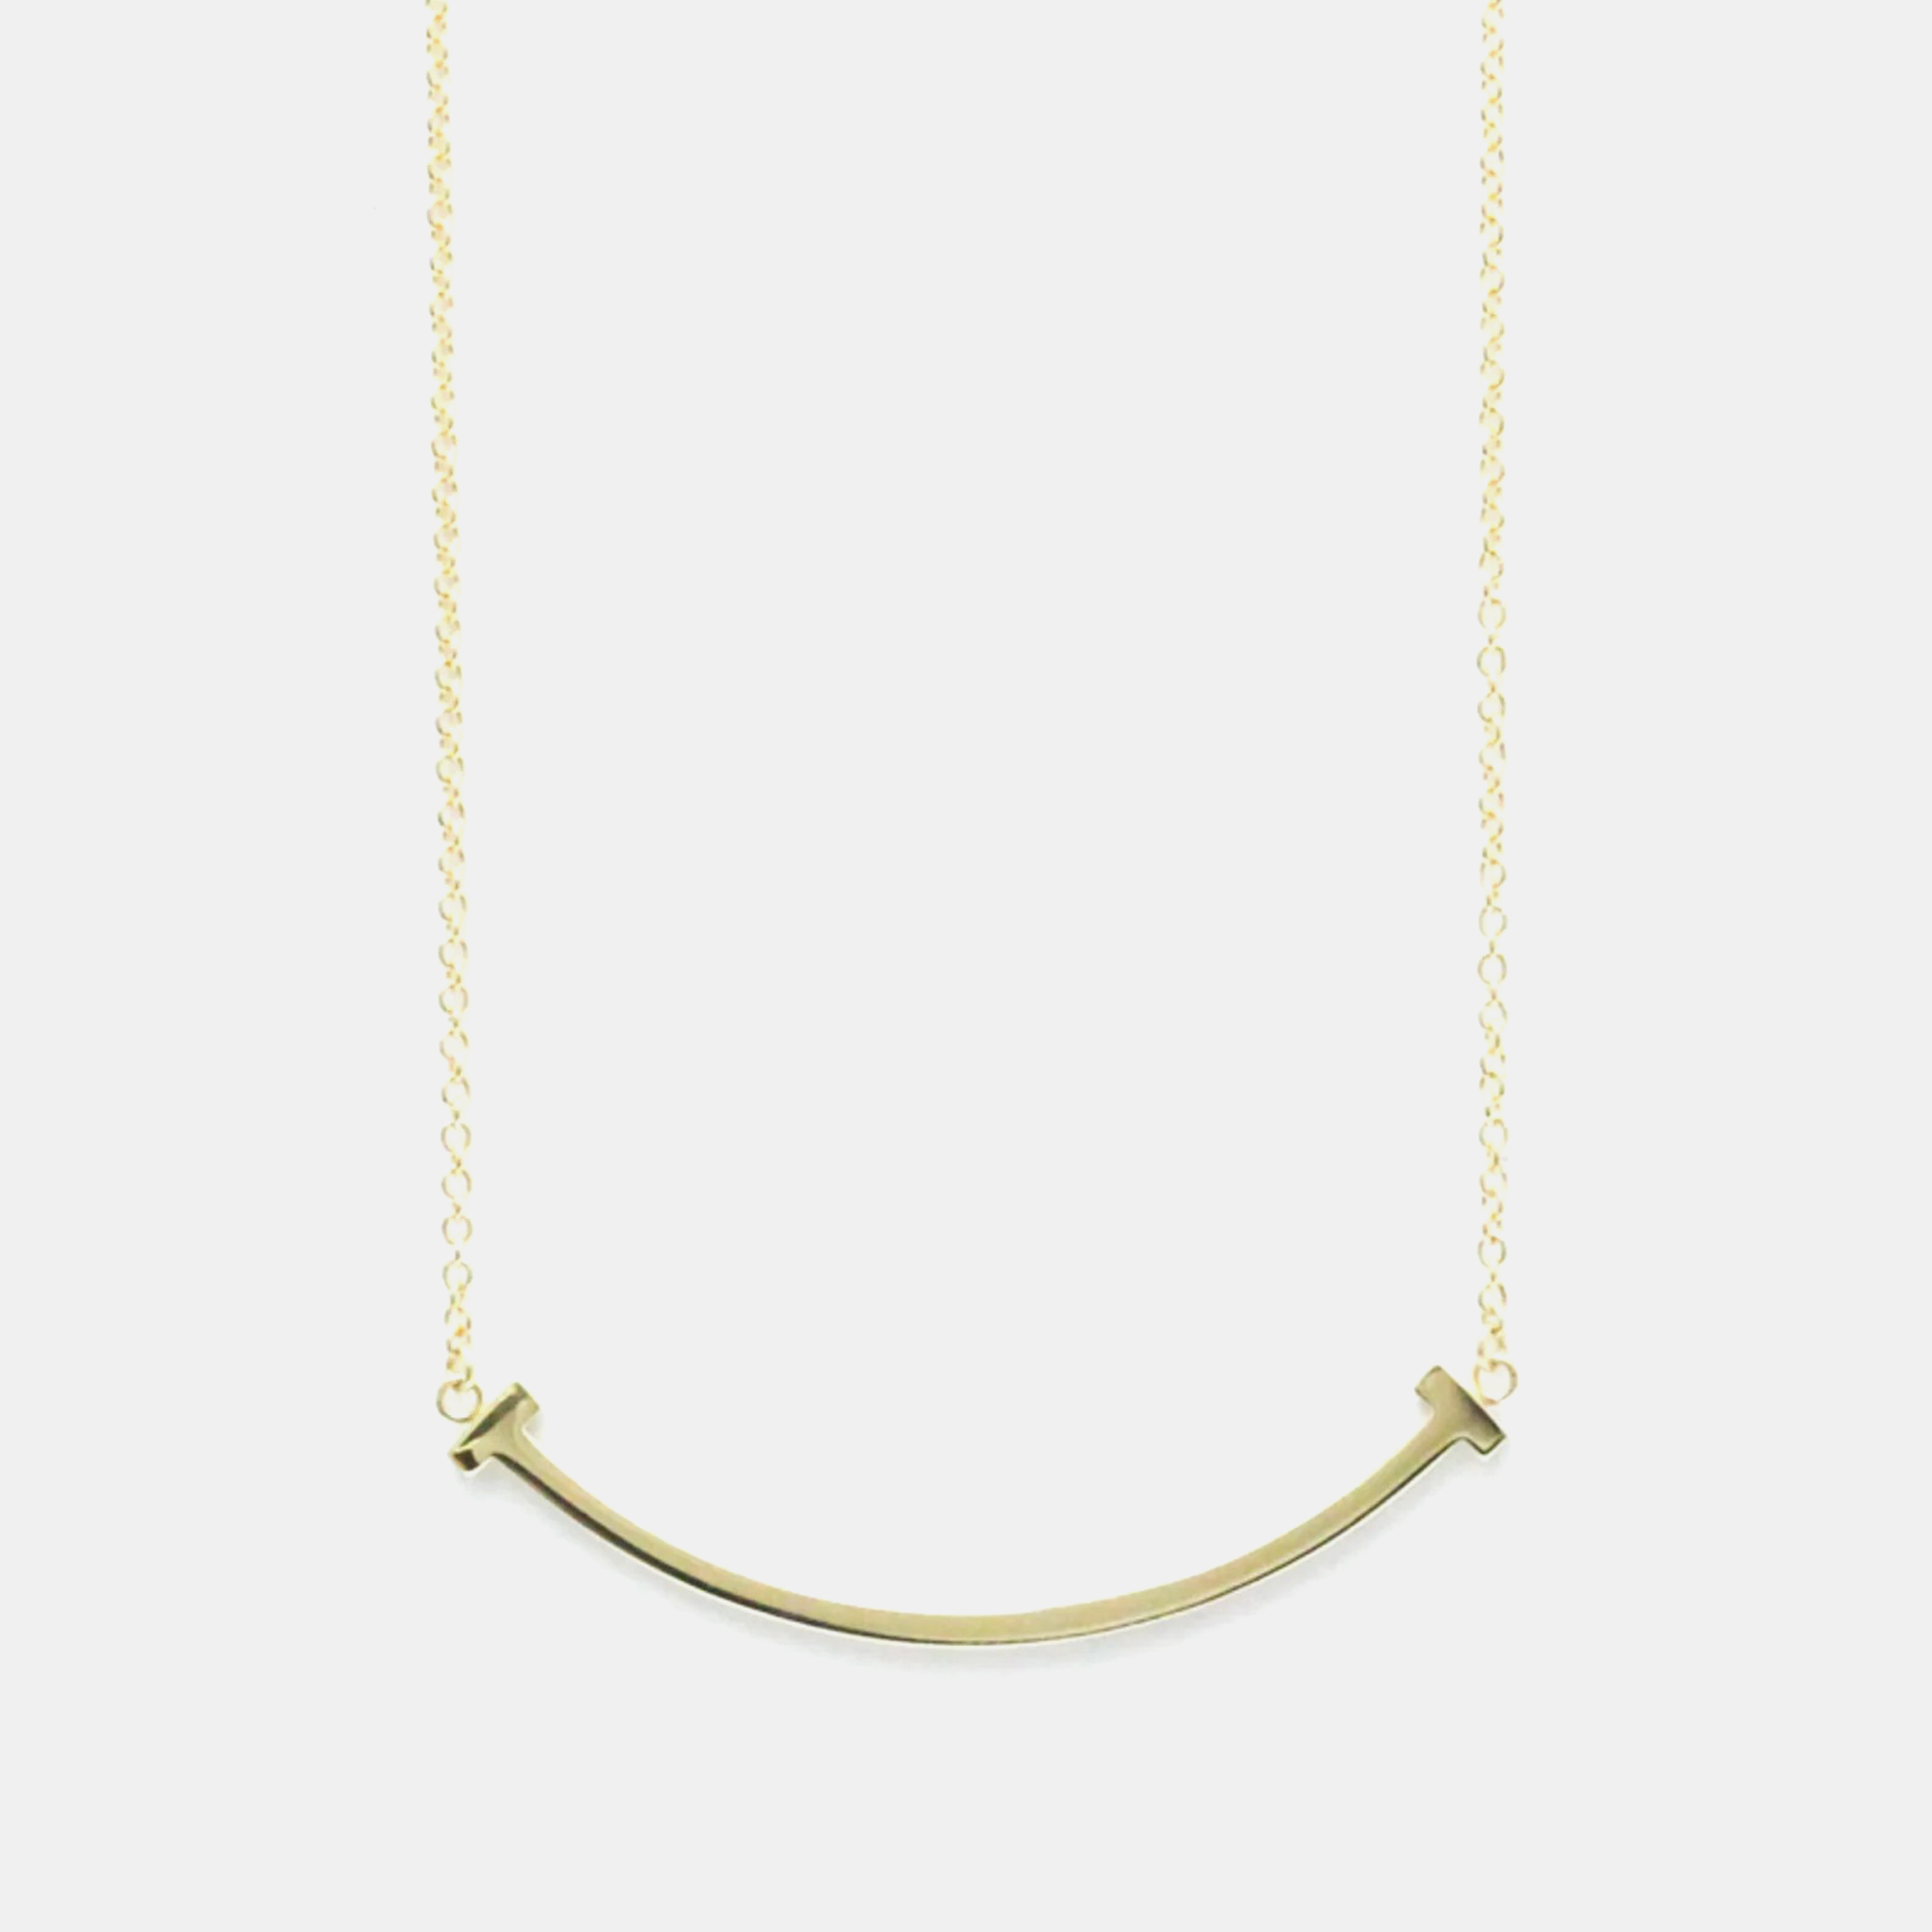 Tiffany & co. 18k yellow gold t smile pendant necklace